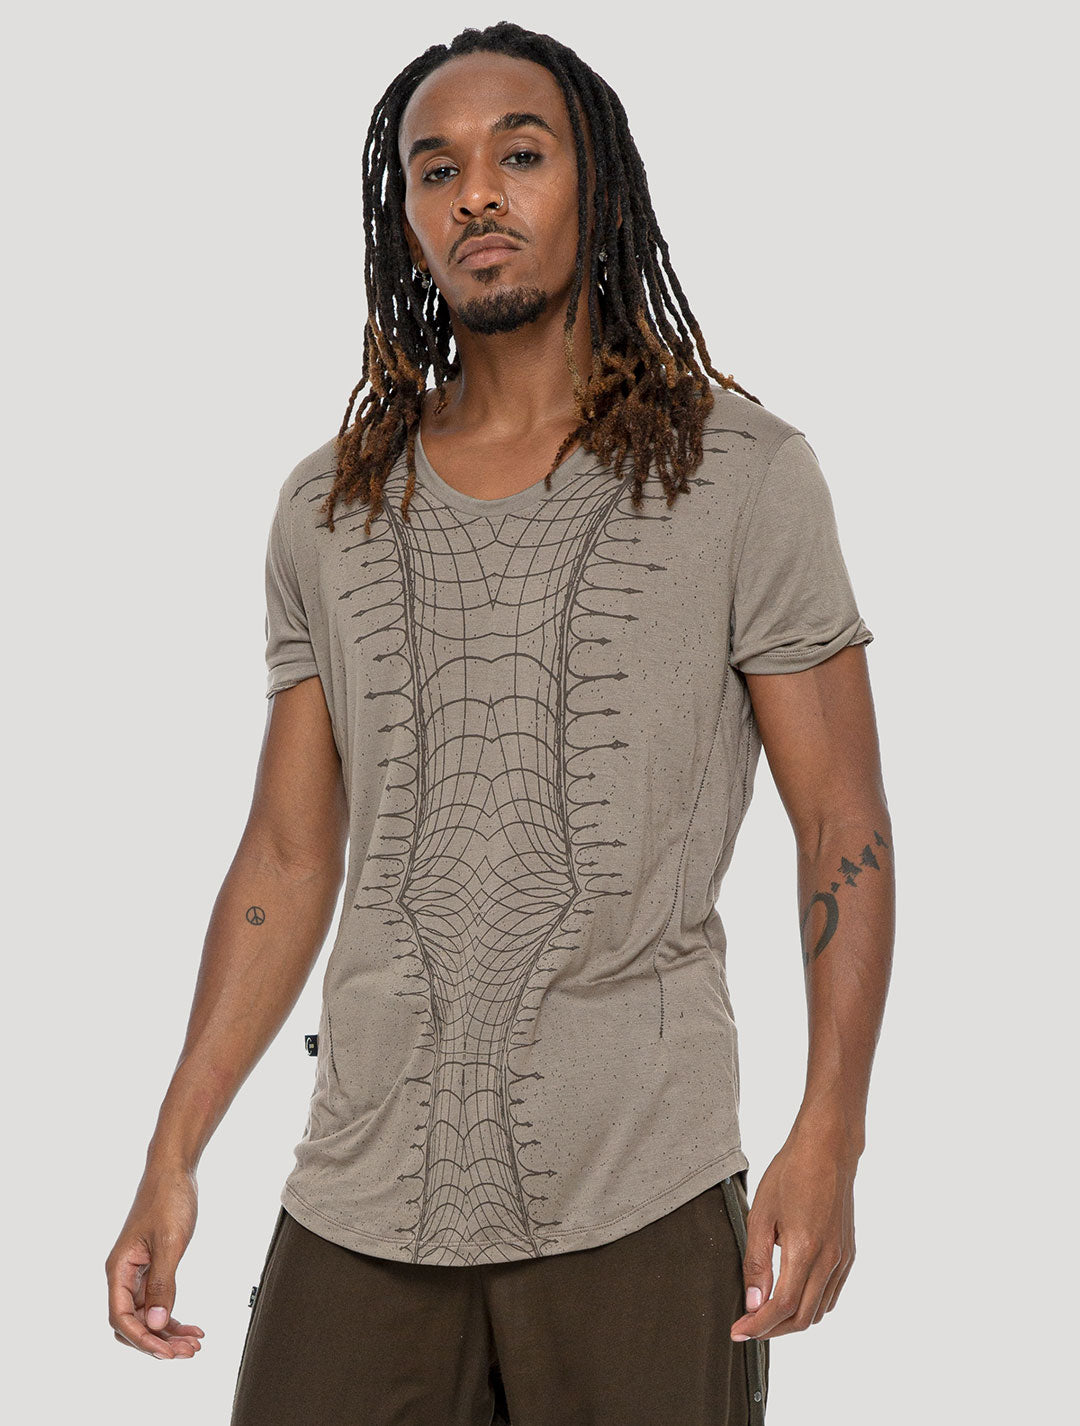 Cement beige 'Vortex' 100% Bamboo Printed T-shirt by Psylo Fashion